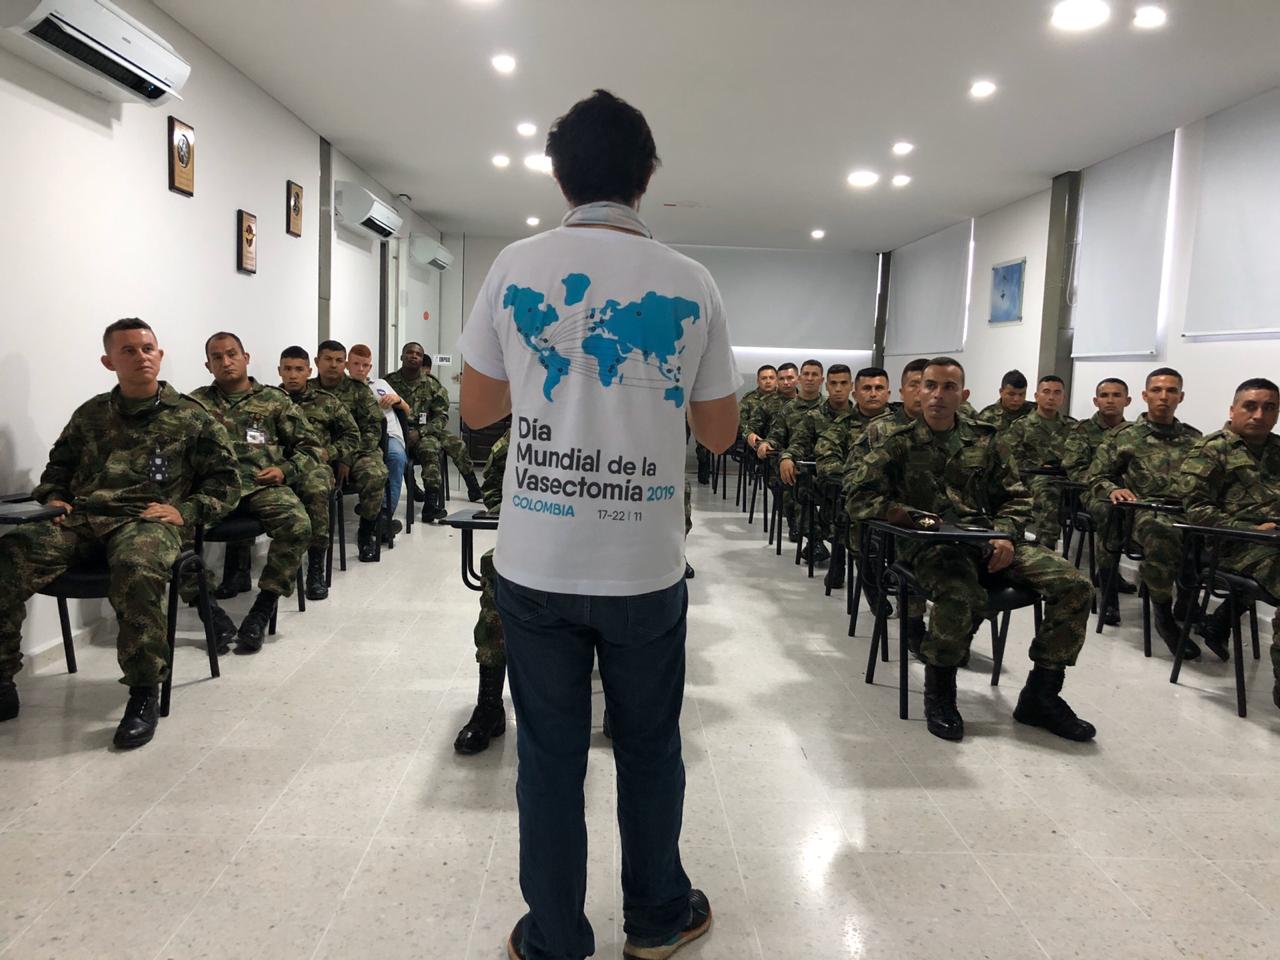 Alliance with the Ministry of Defense and with the Colombian Military Forces